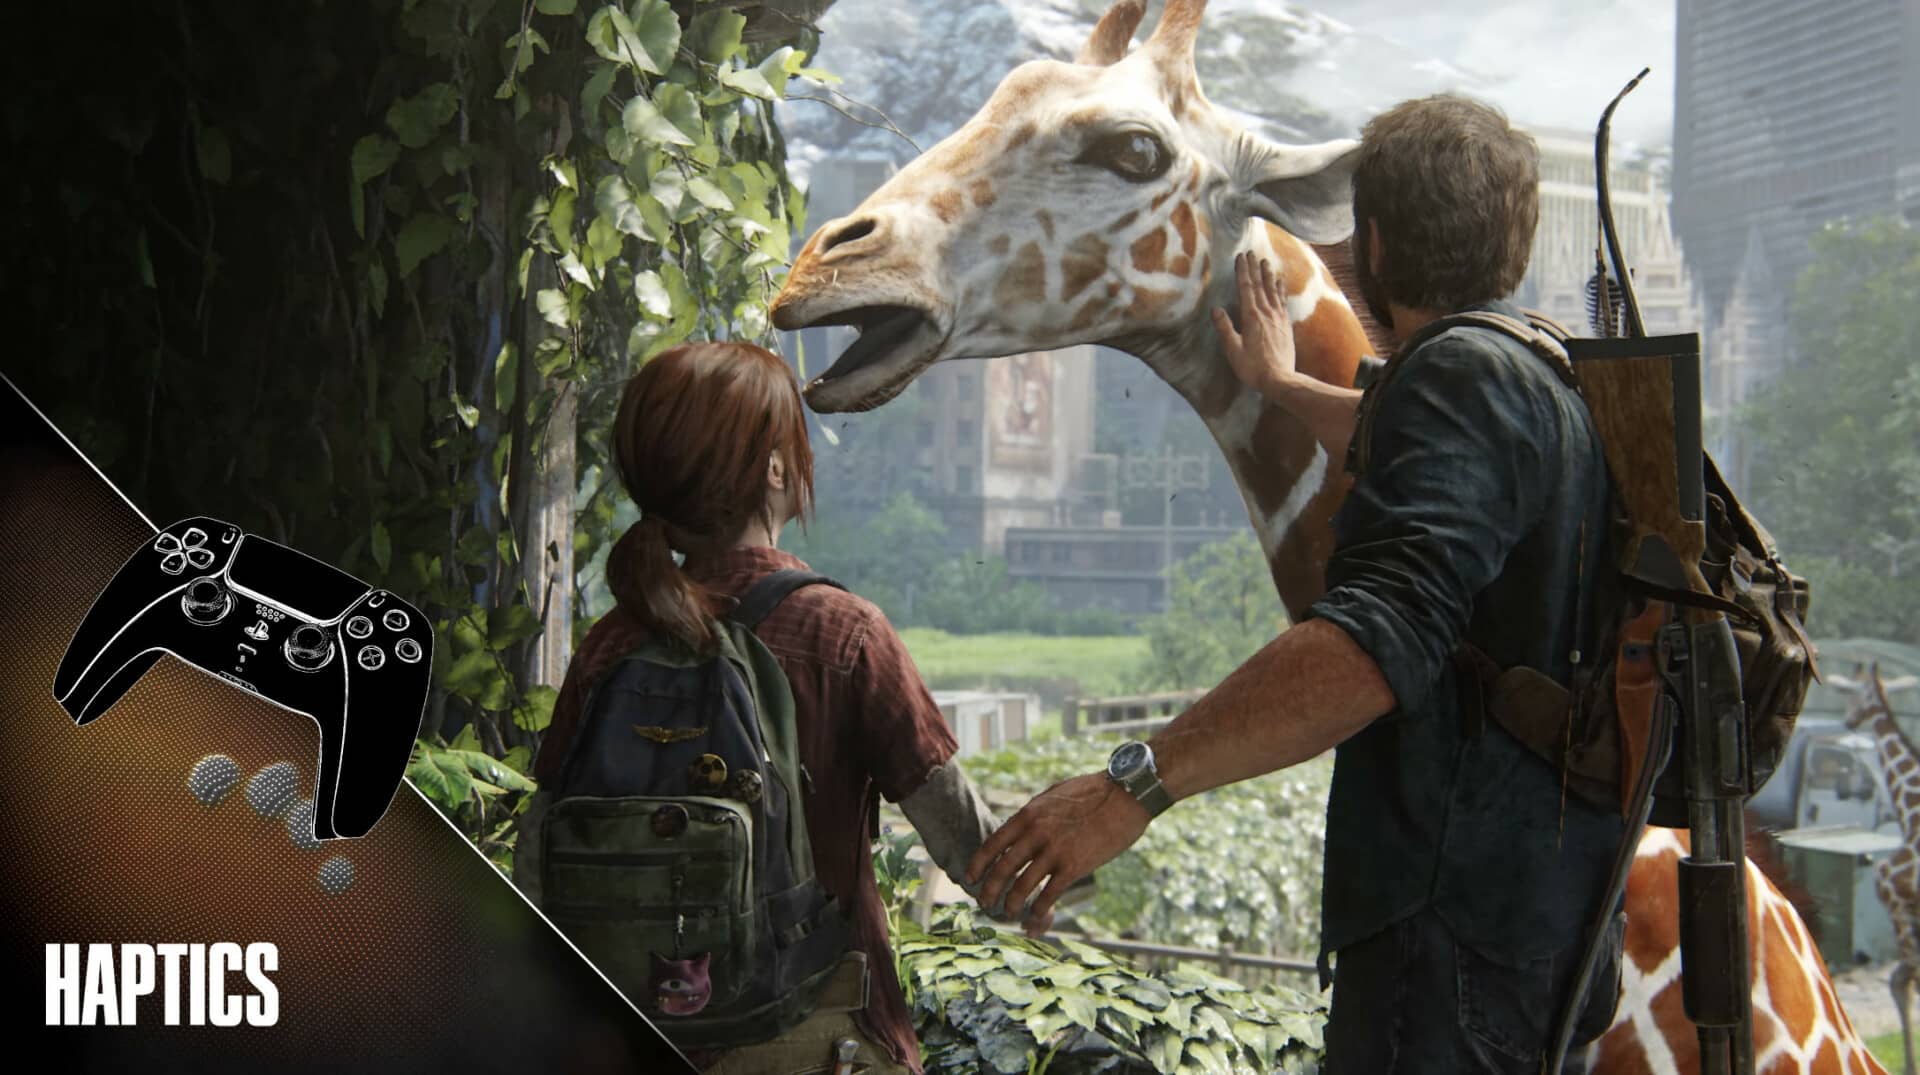 The Last of Us 2 enhanced on PS5 with Adaptive Triggers